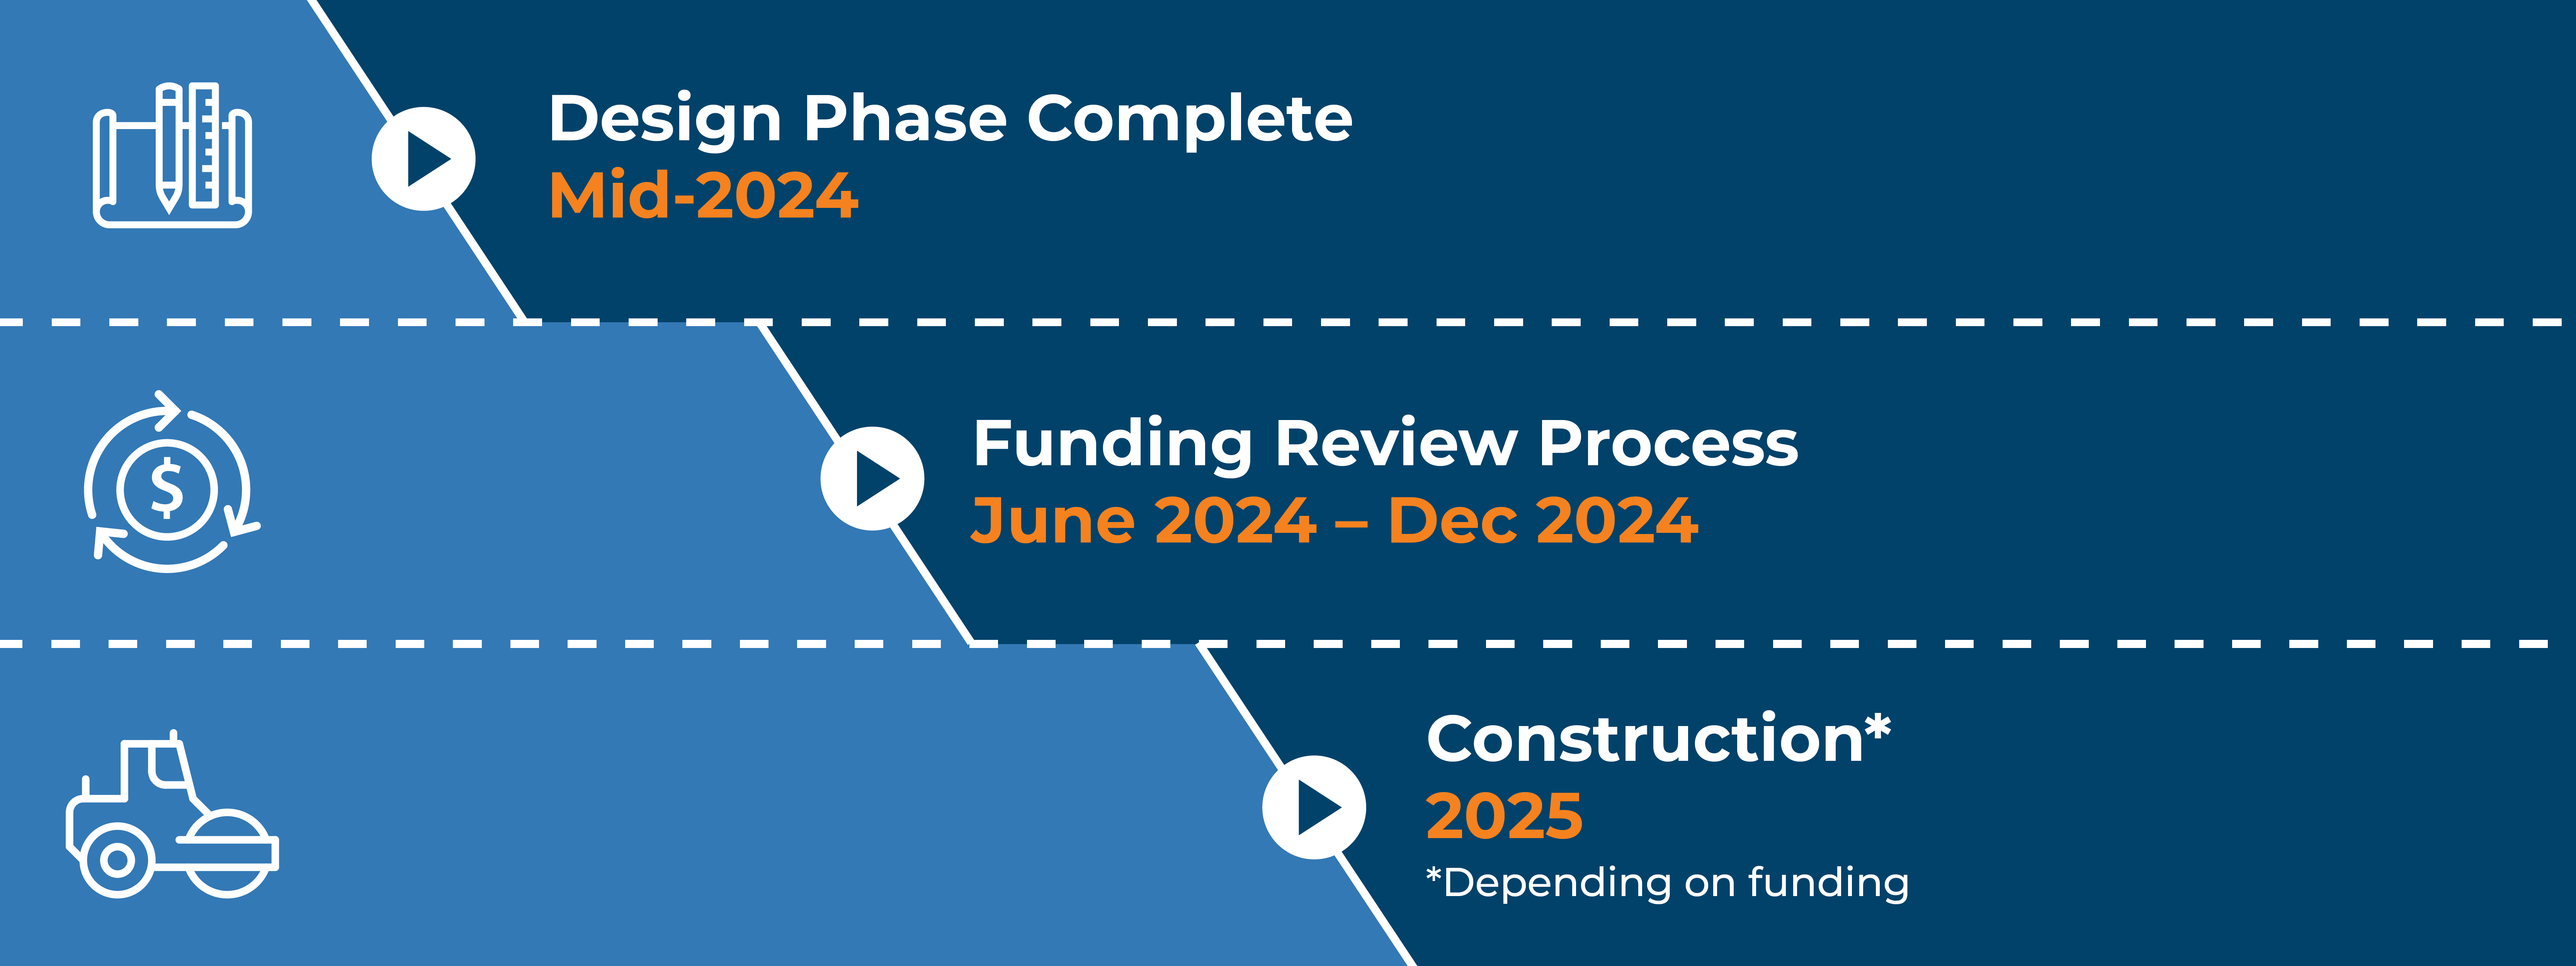 Project Timeline: Design phase complete, mid-2024; funding review process, June–December 2024; construction (depending on funding), 2025.